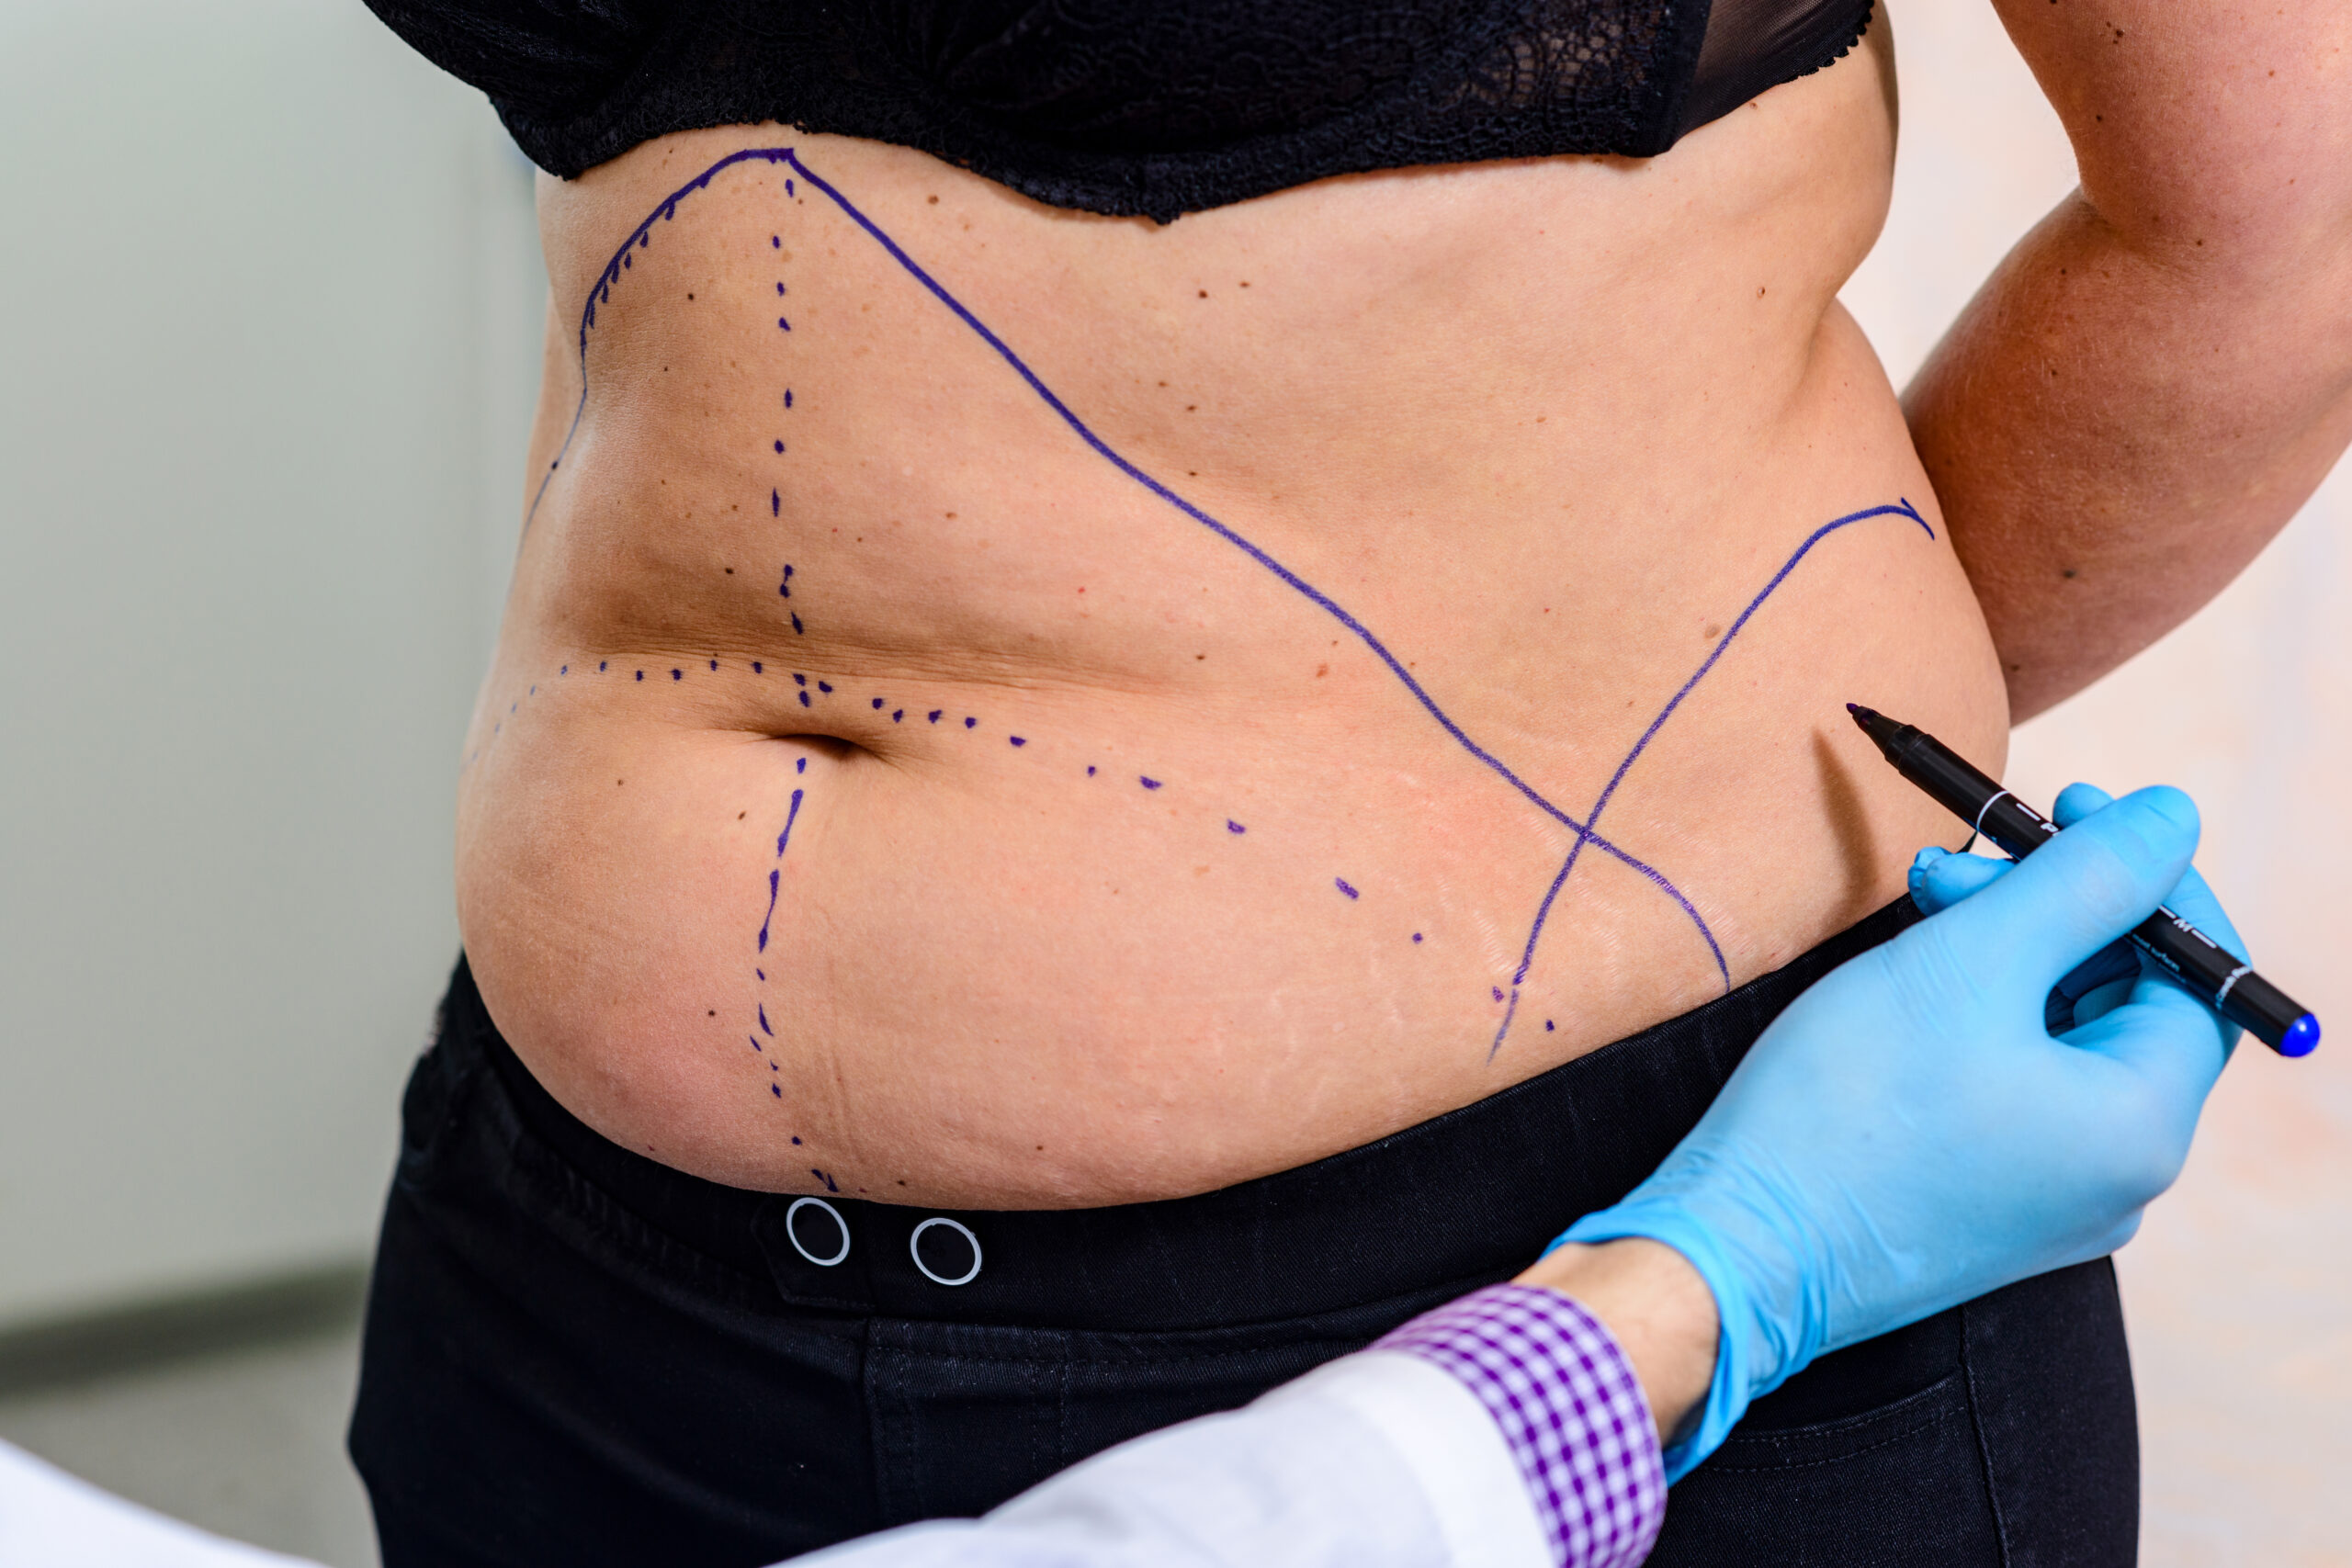 The doctor drawing lines on the patient’s skin